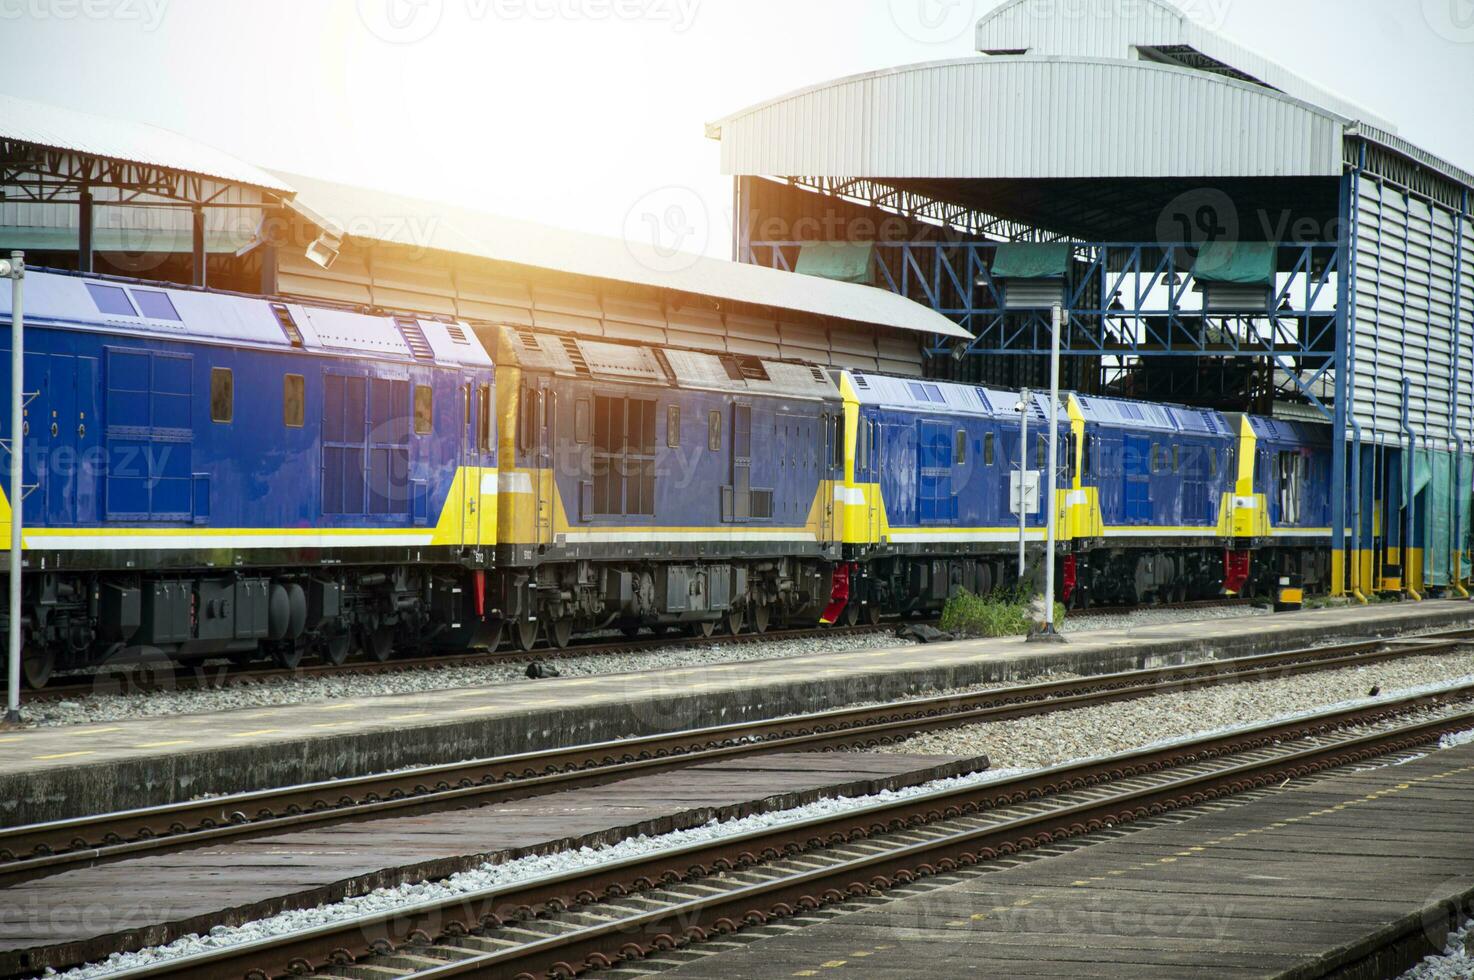 A train of diesel trains entering the platform Freight and passenger trains photo